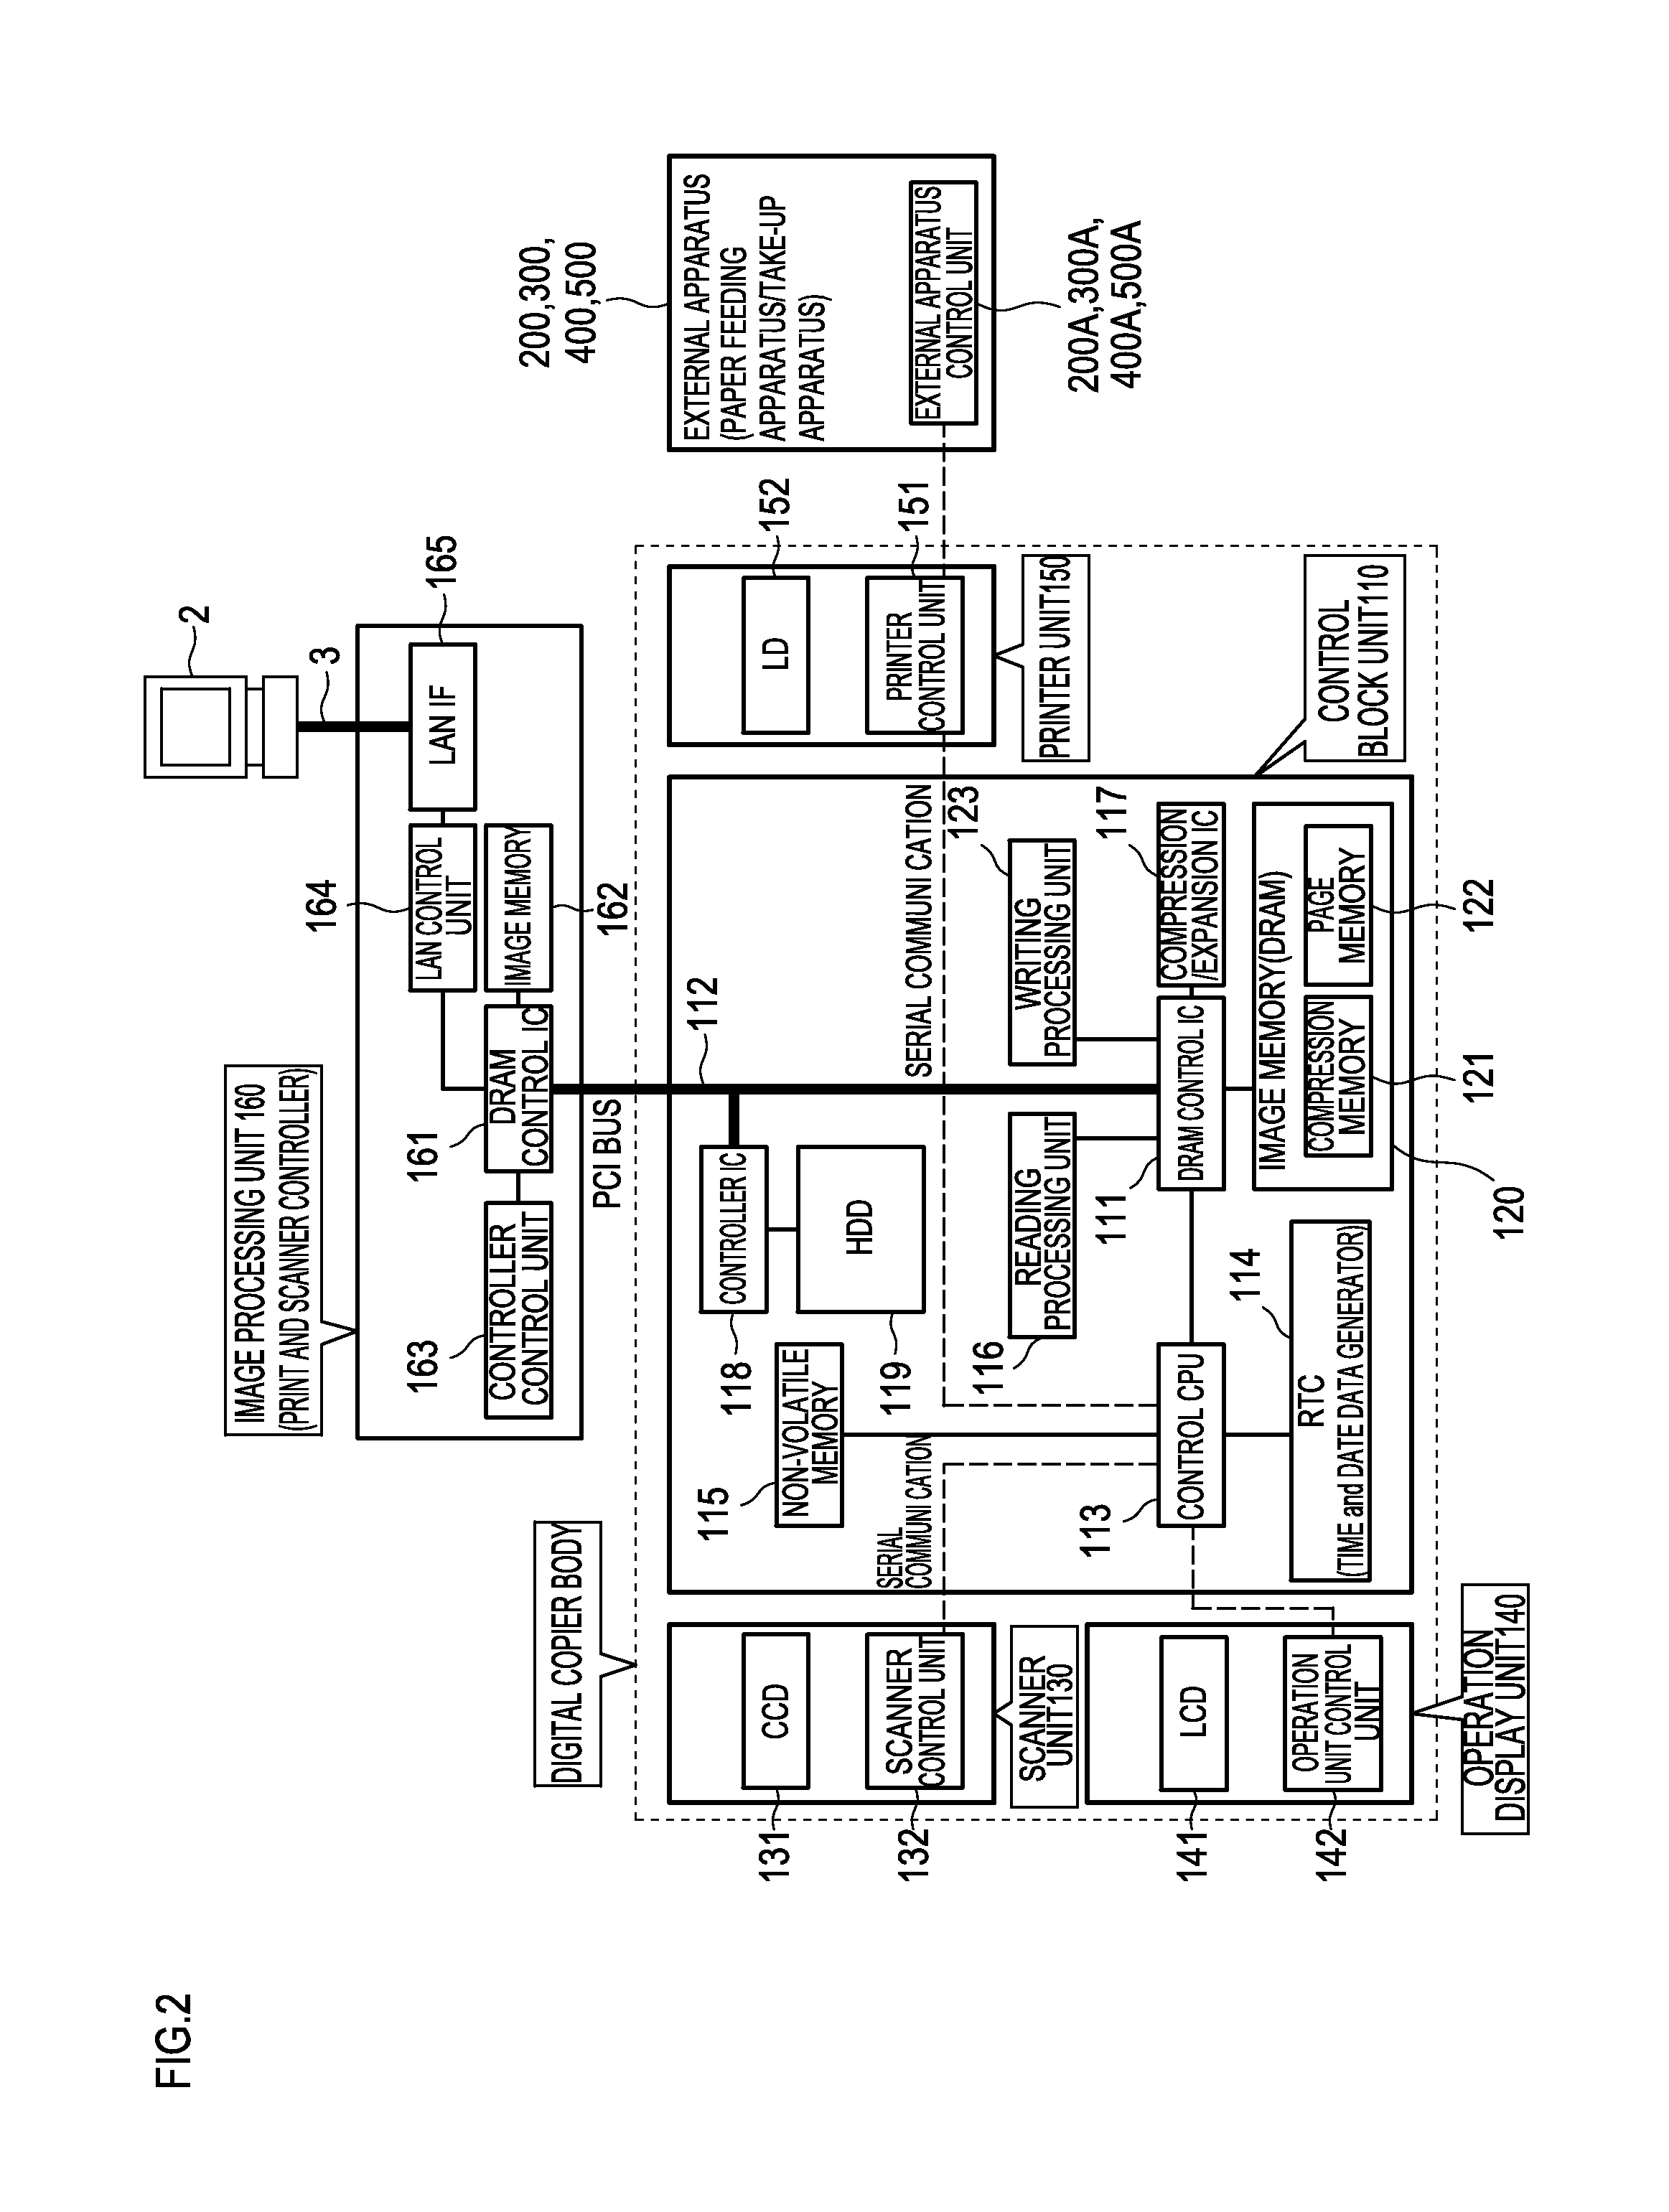 Image forming apparatus, image forming system and image forming maintenance method